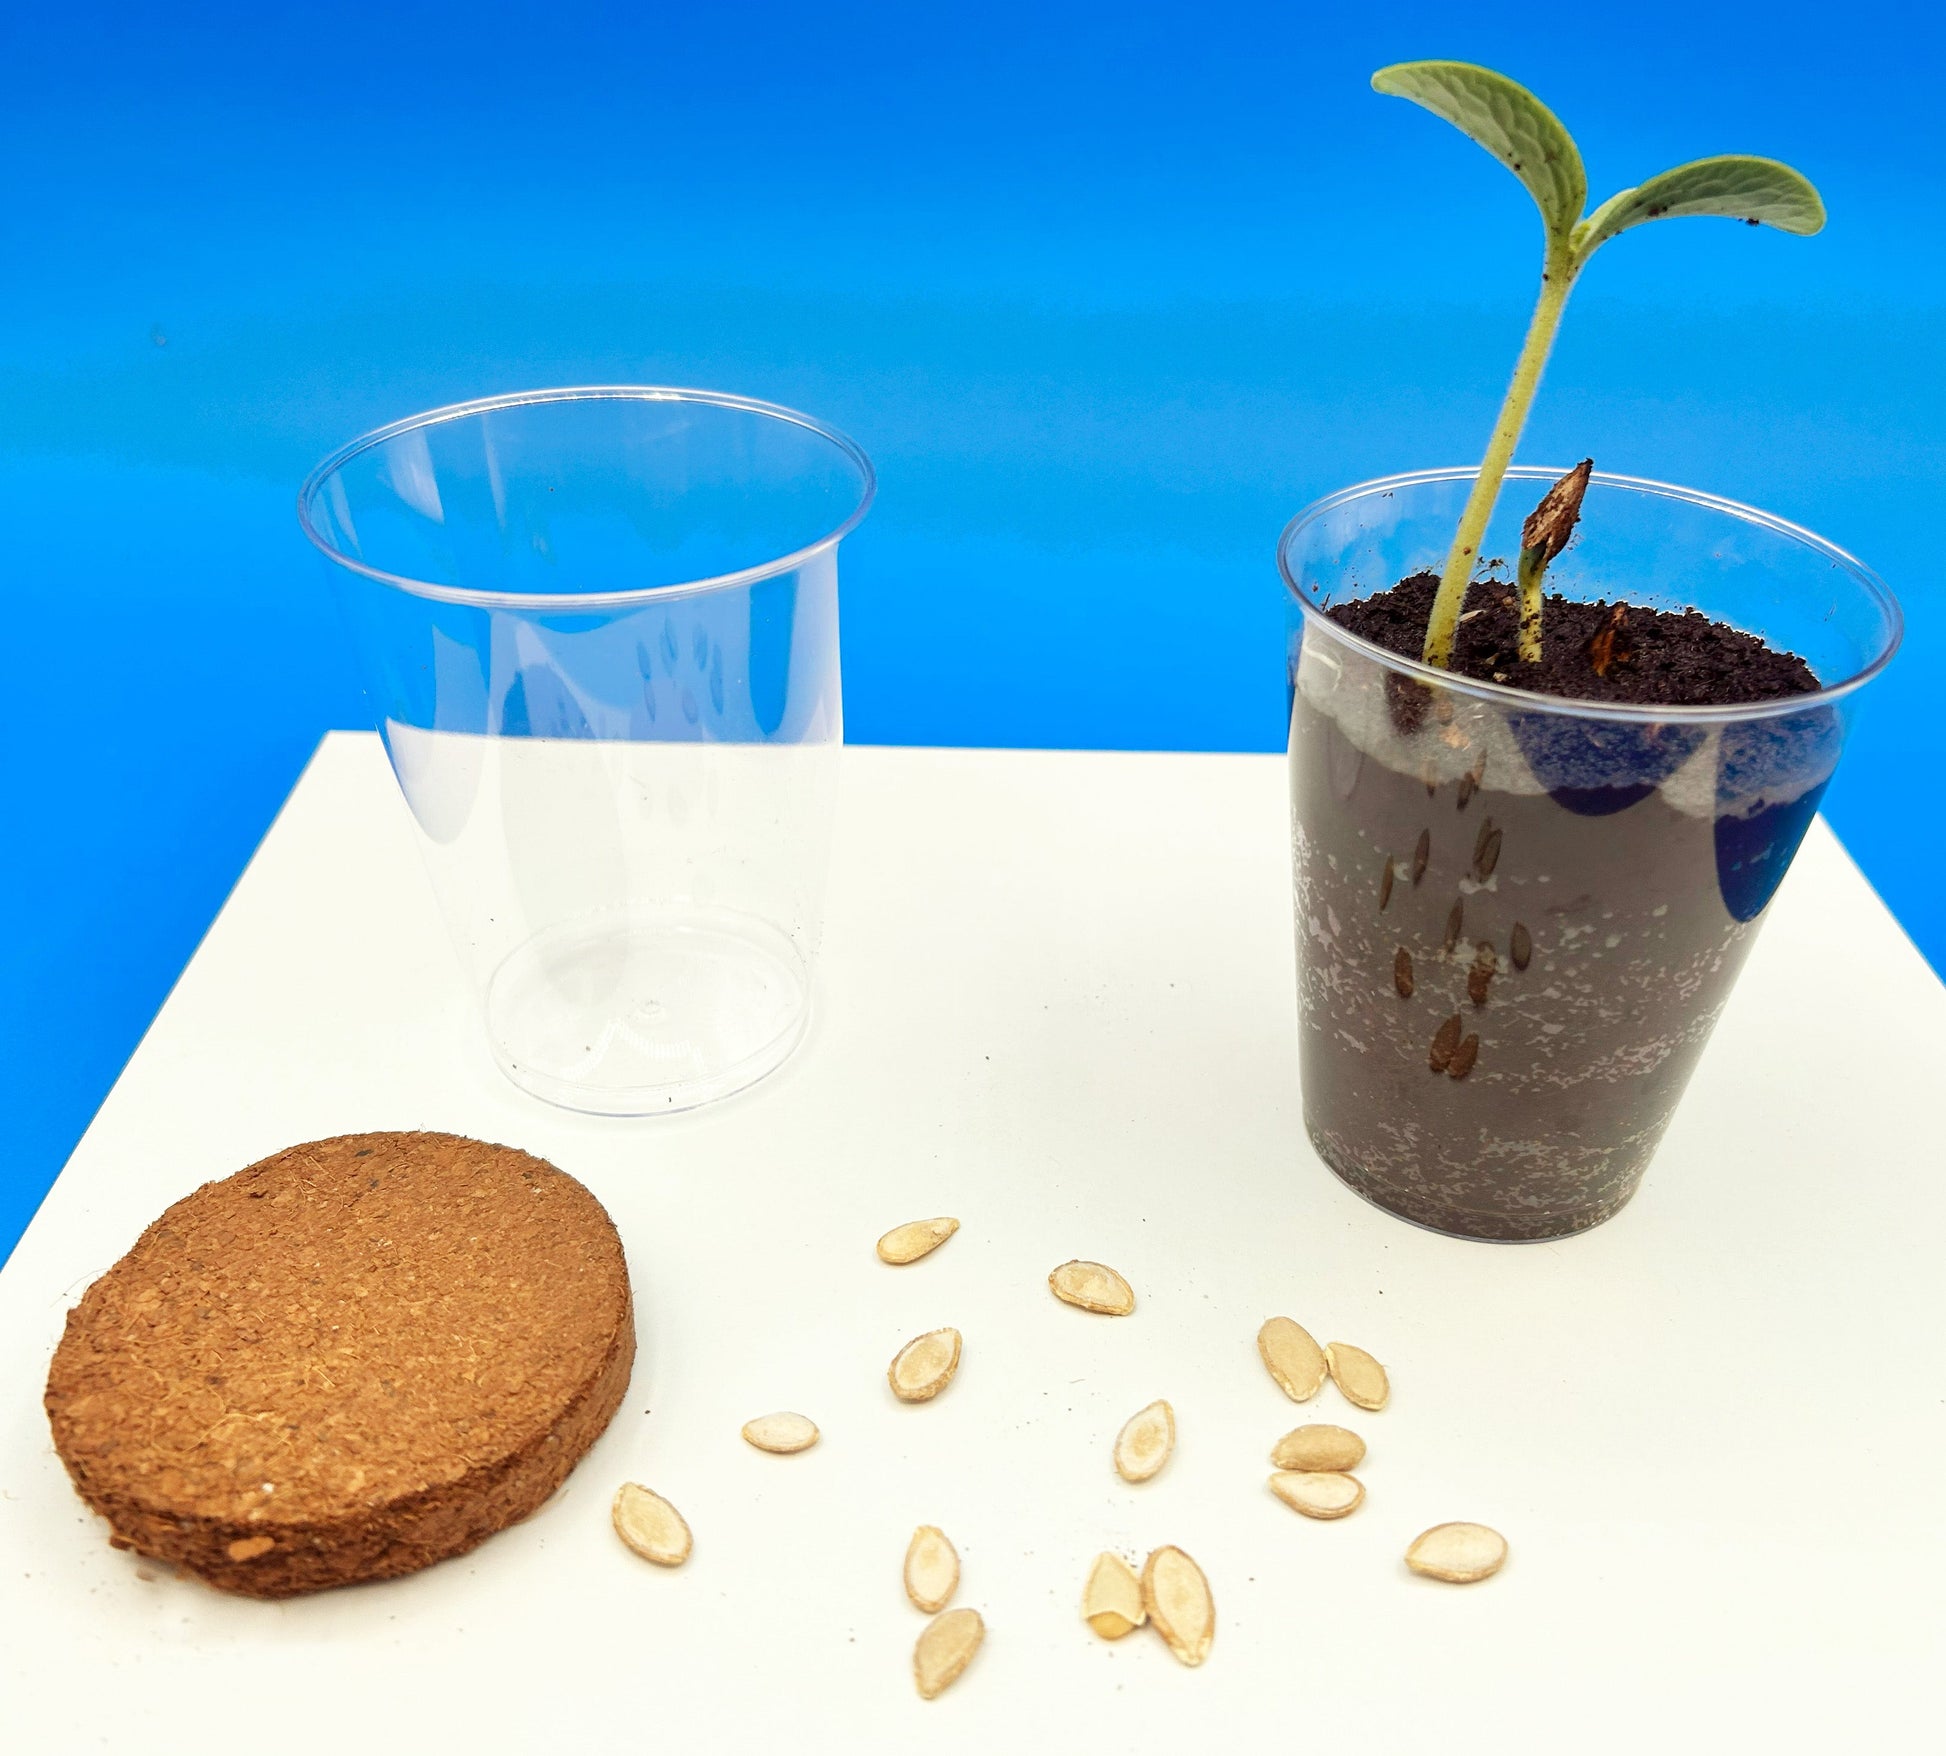 Planting Squash Seeds kids science experiment 